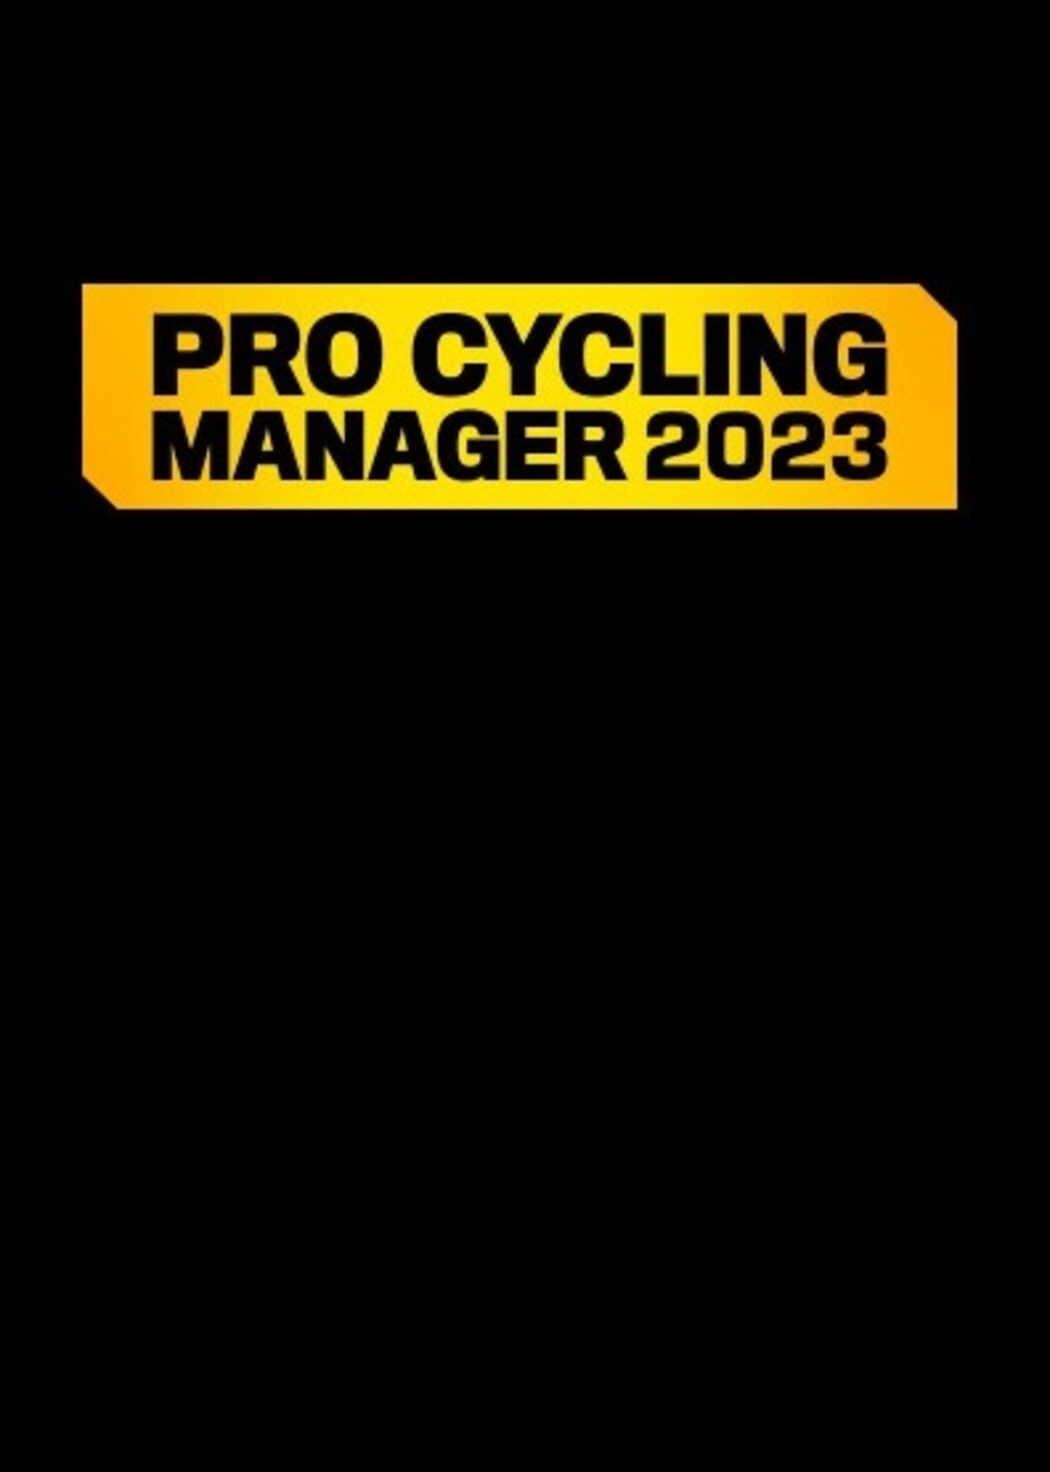 Buy cheap Pro Cycling Manager 2022 cd key - lowest price